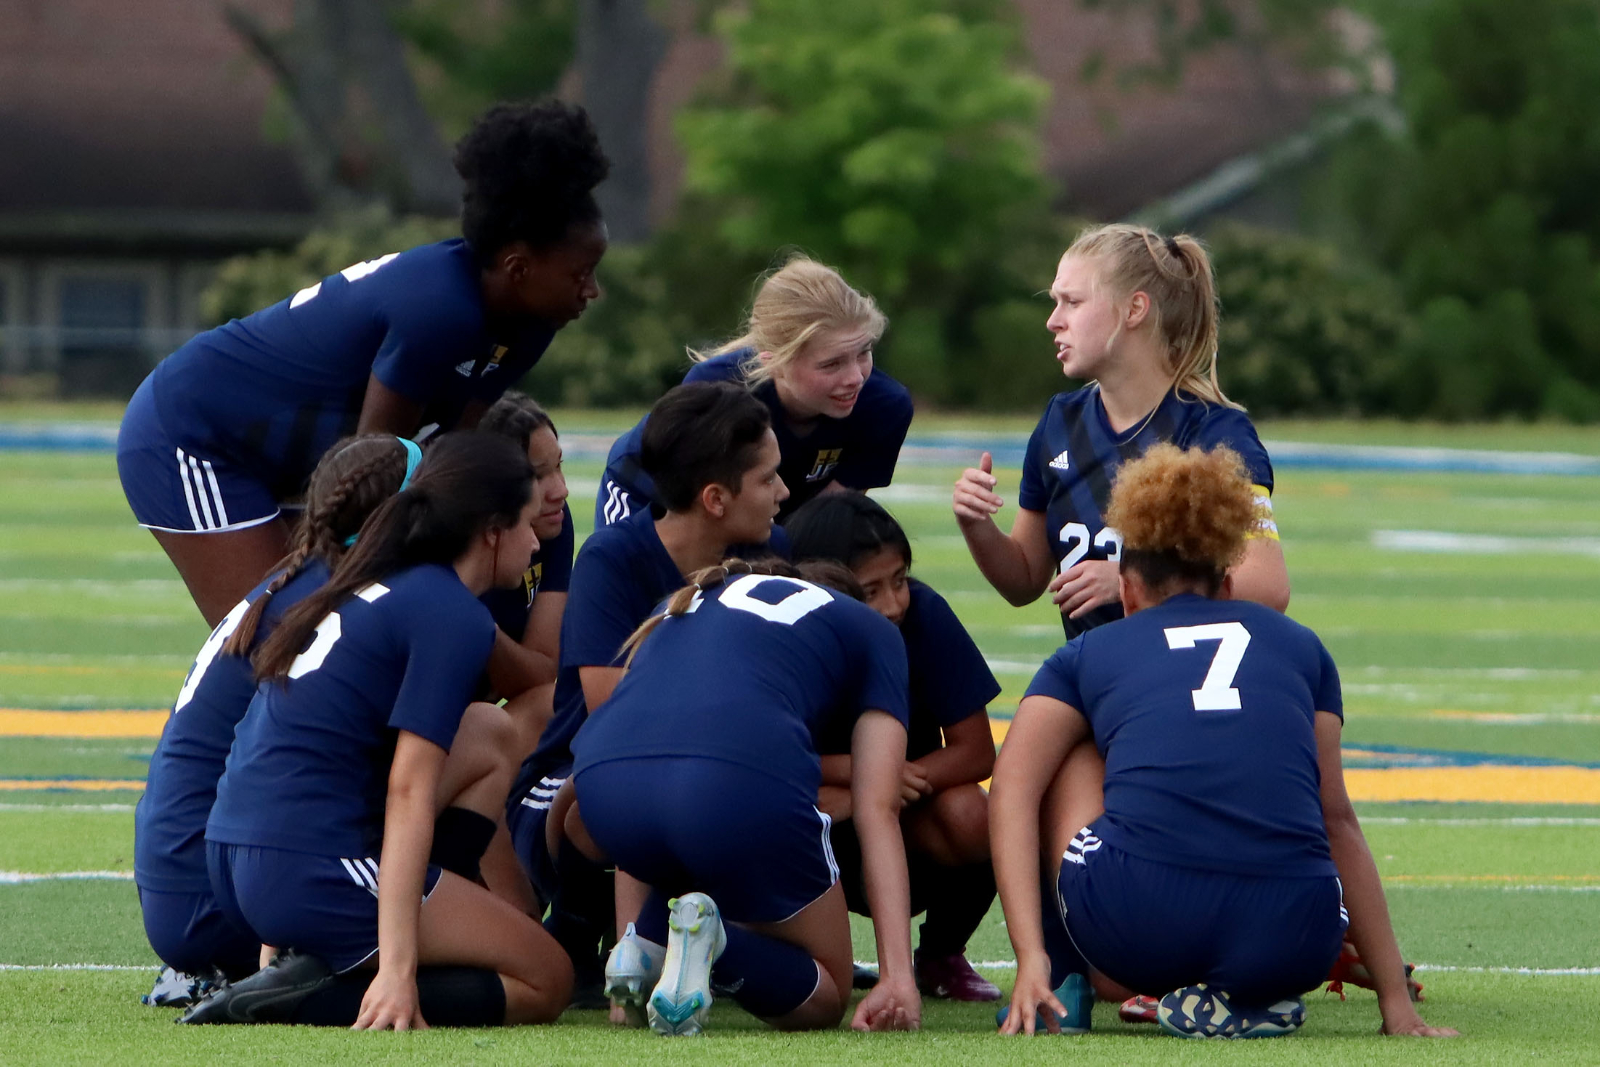 Soccer Girls Player in a Team Huddle